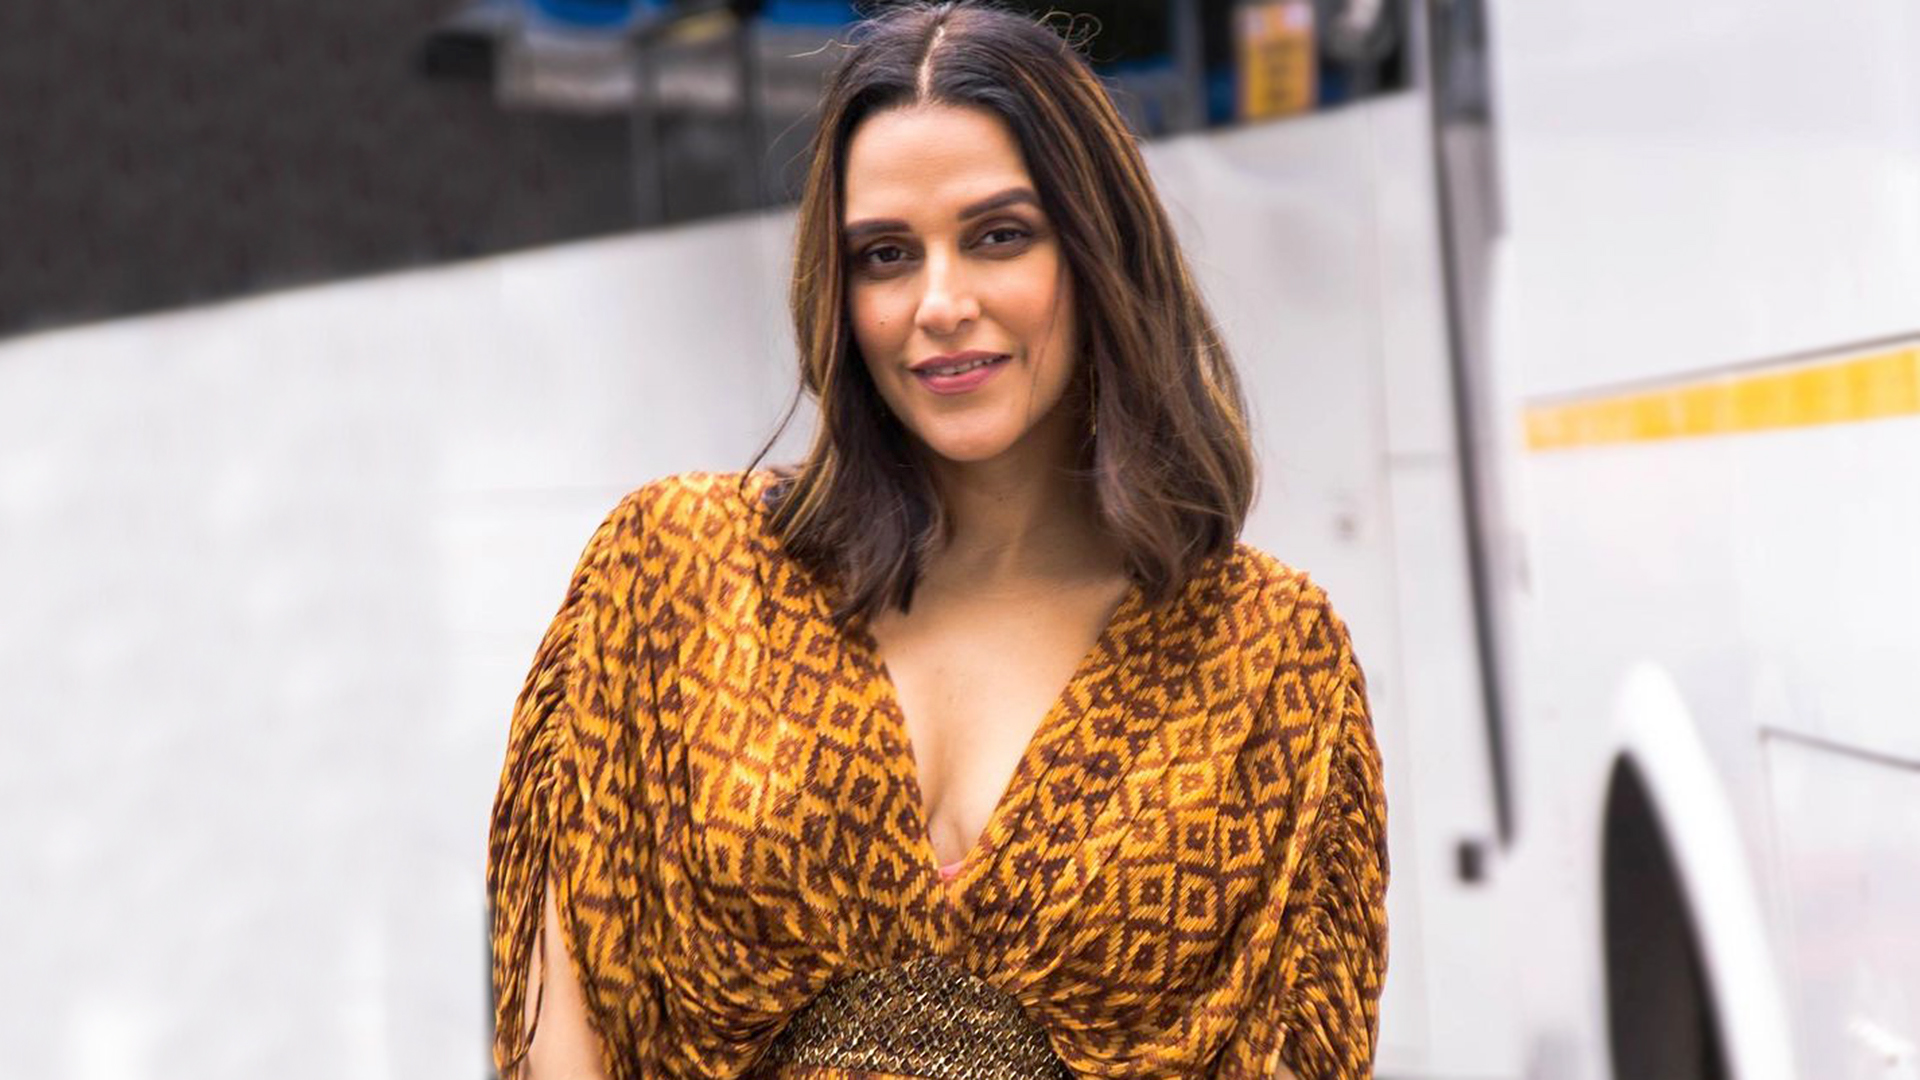 Neha Dhupia (Indian Actress) - Age, Family, Movies, Net Worth, Biography